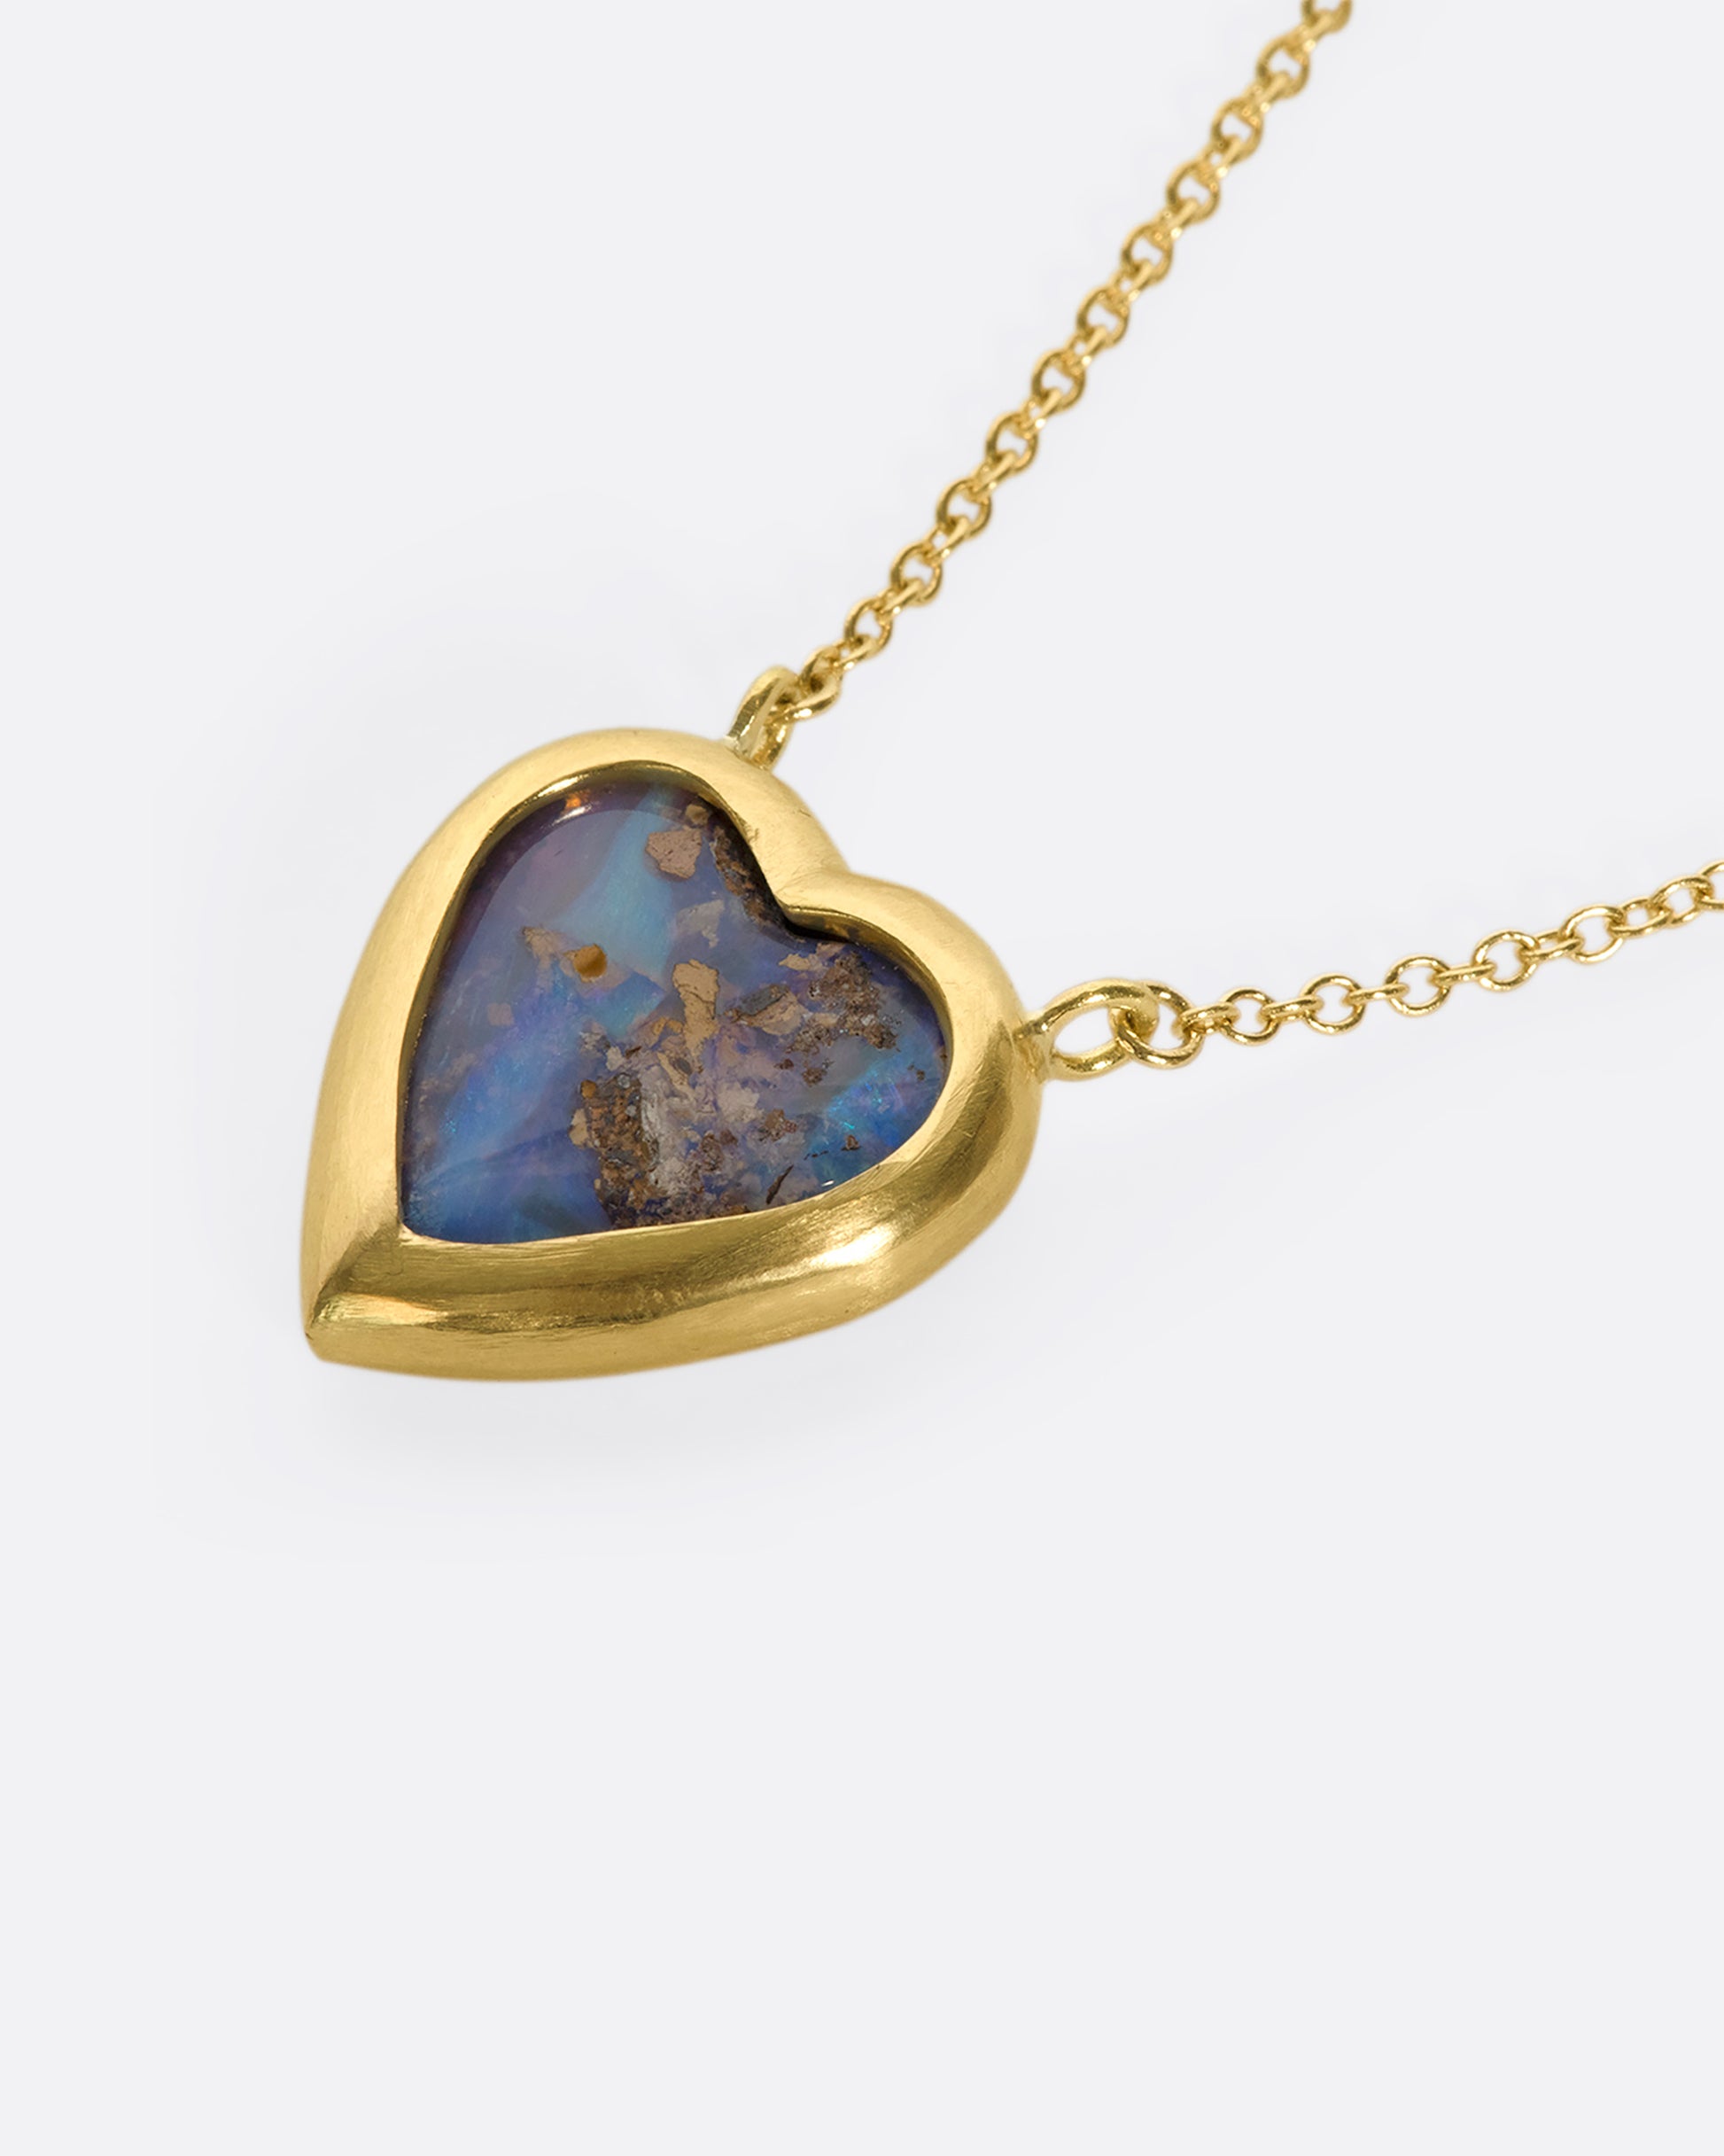 An opal heart pendant enwrapped with an 18k gold bezel setting, suspended on a fine gold chain with diamond spacers